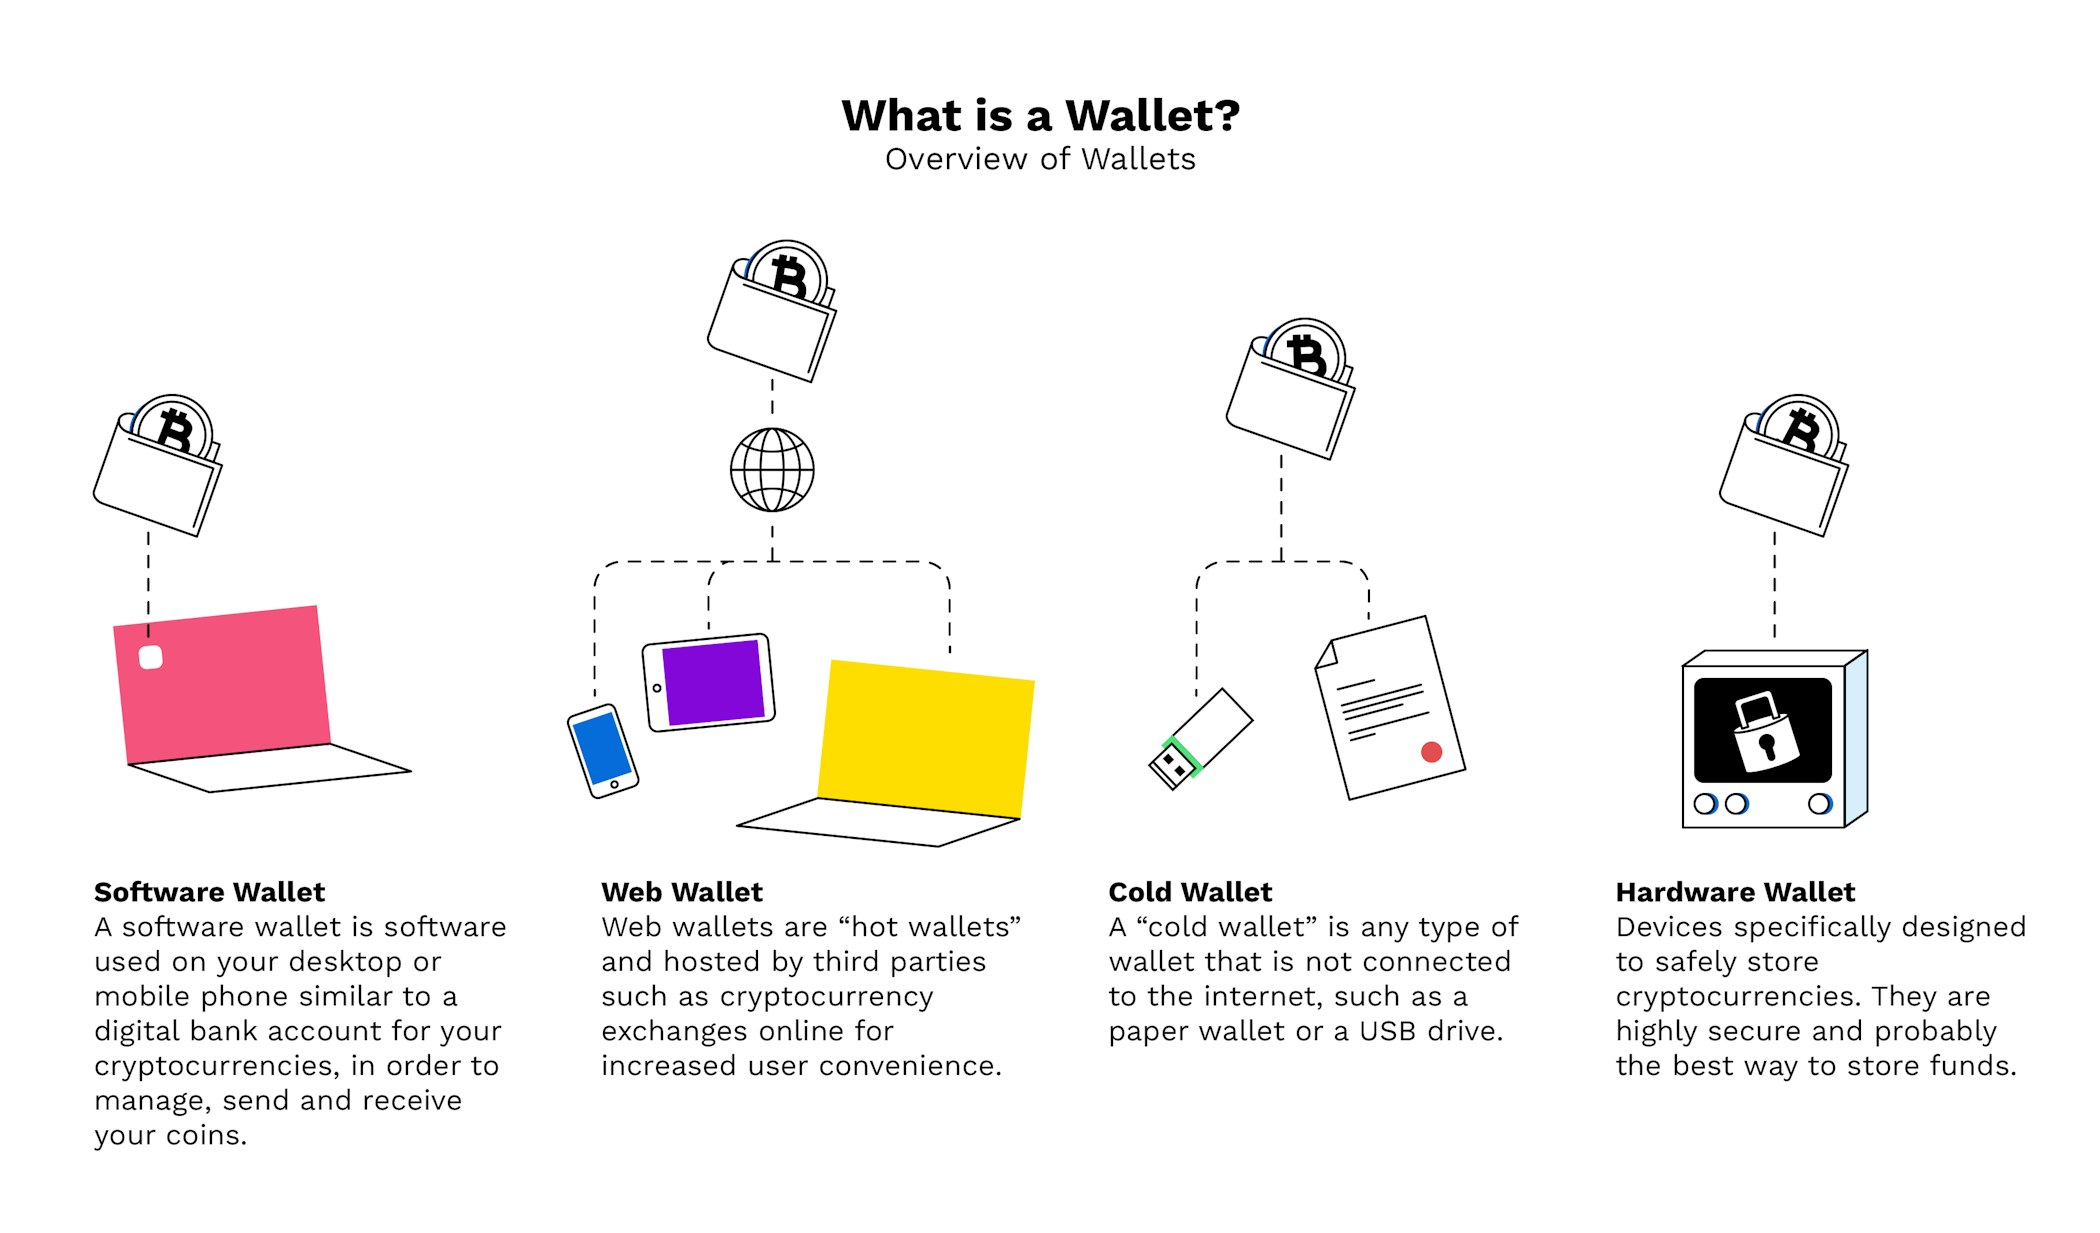 How Do Cryptocurrency Hardware Wallets Work